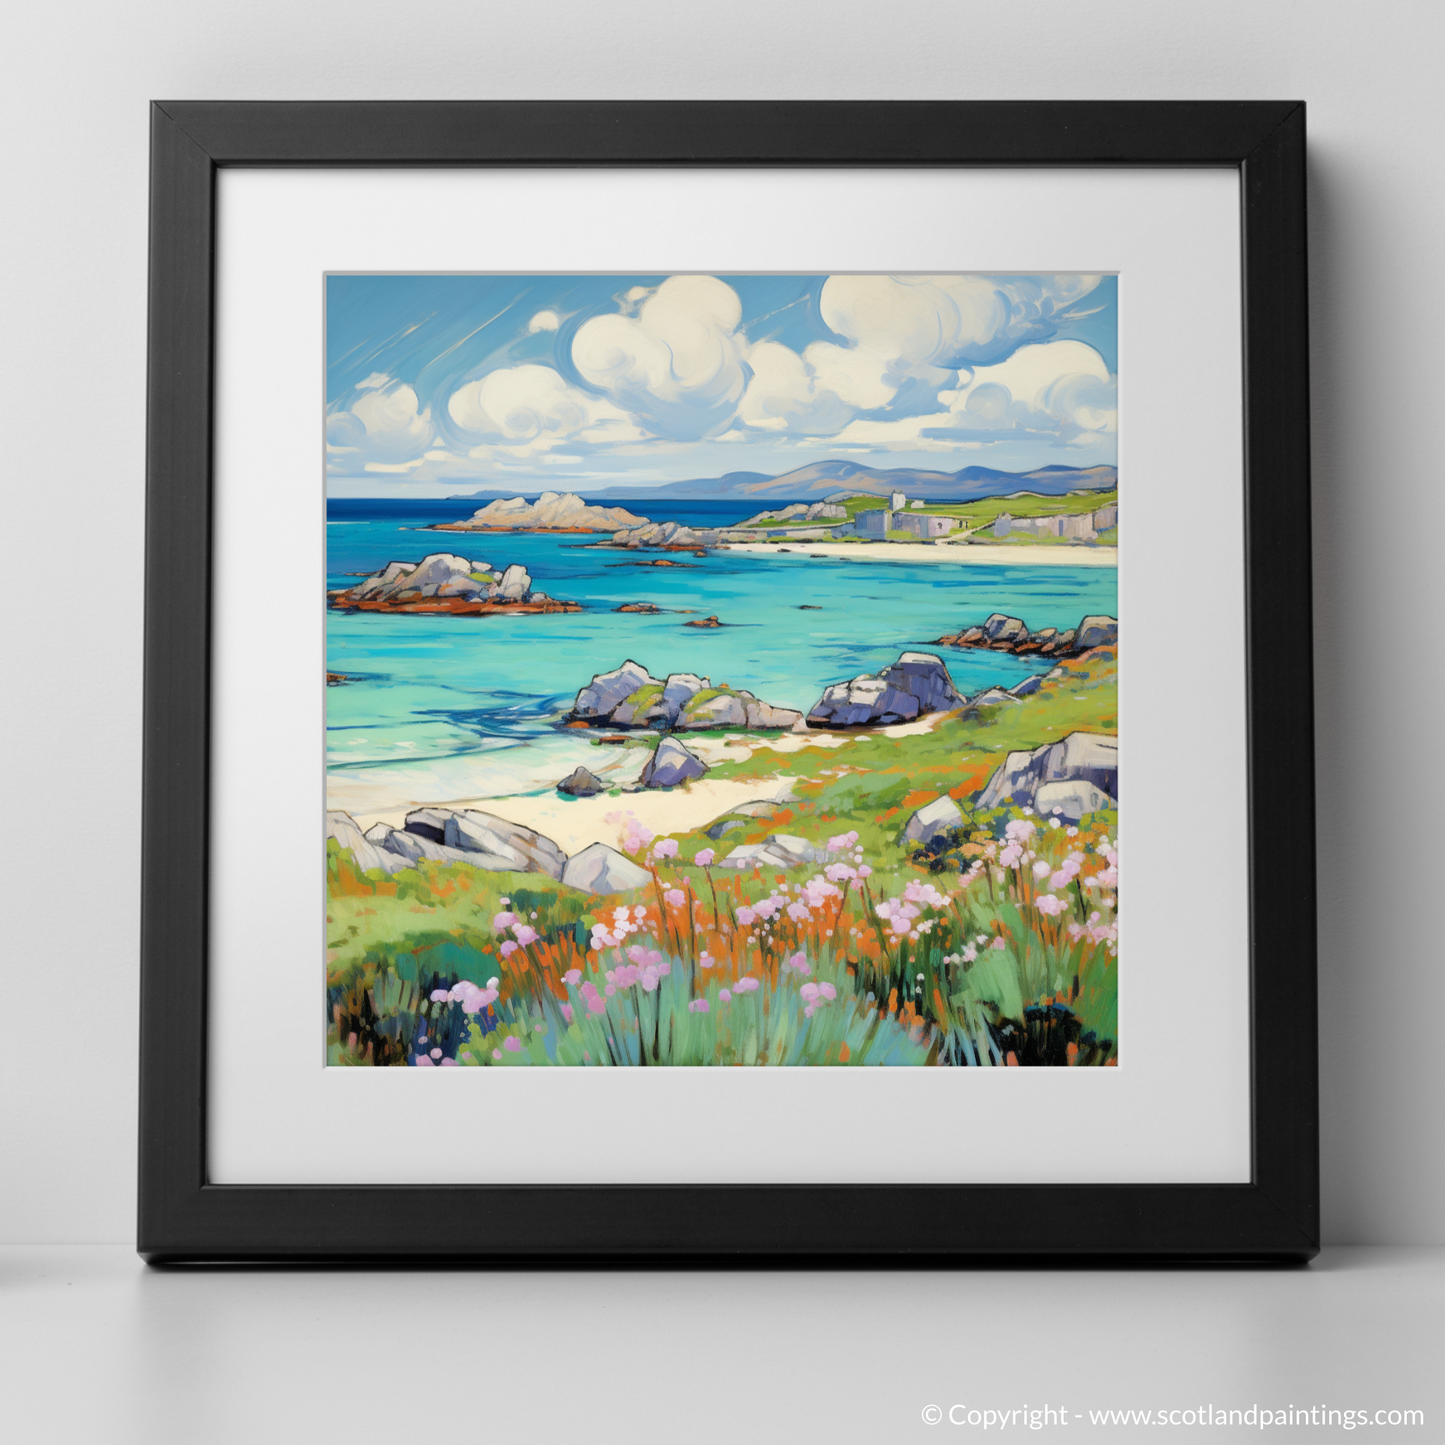 Art Print of Isle of Iona, Inner Hebrides in summer with a black frame